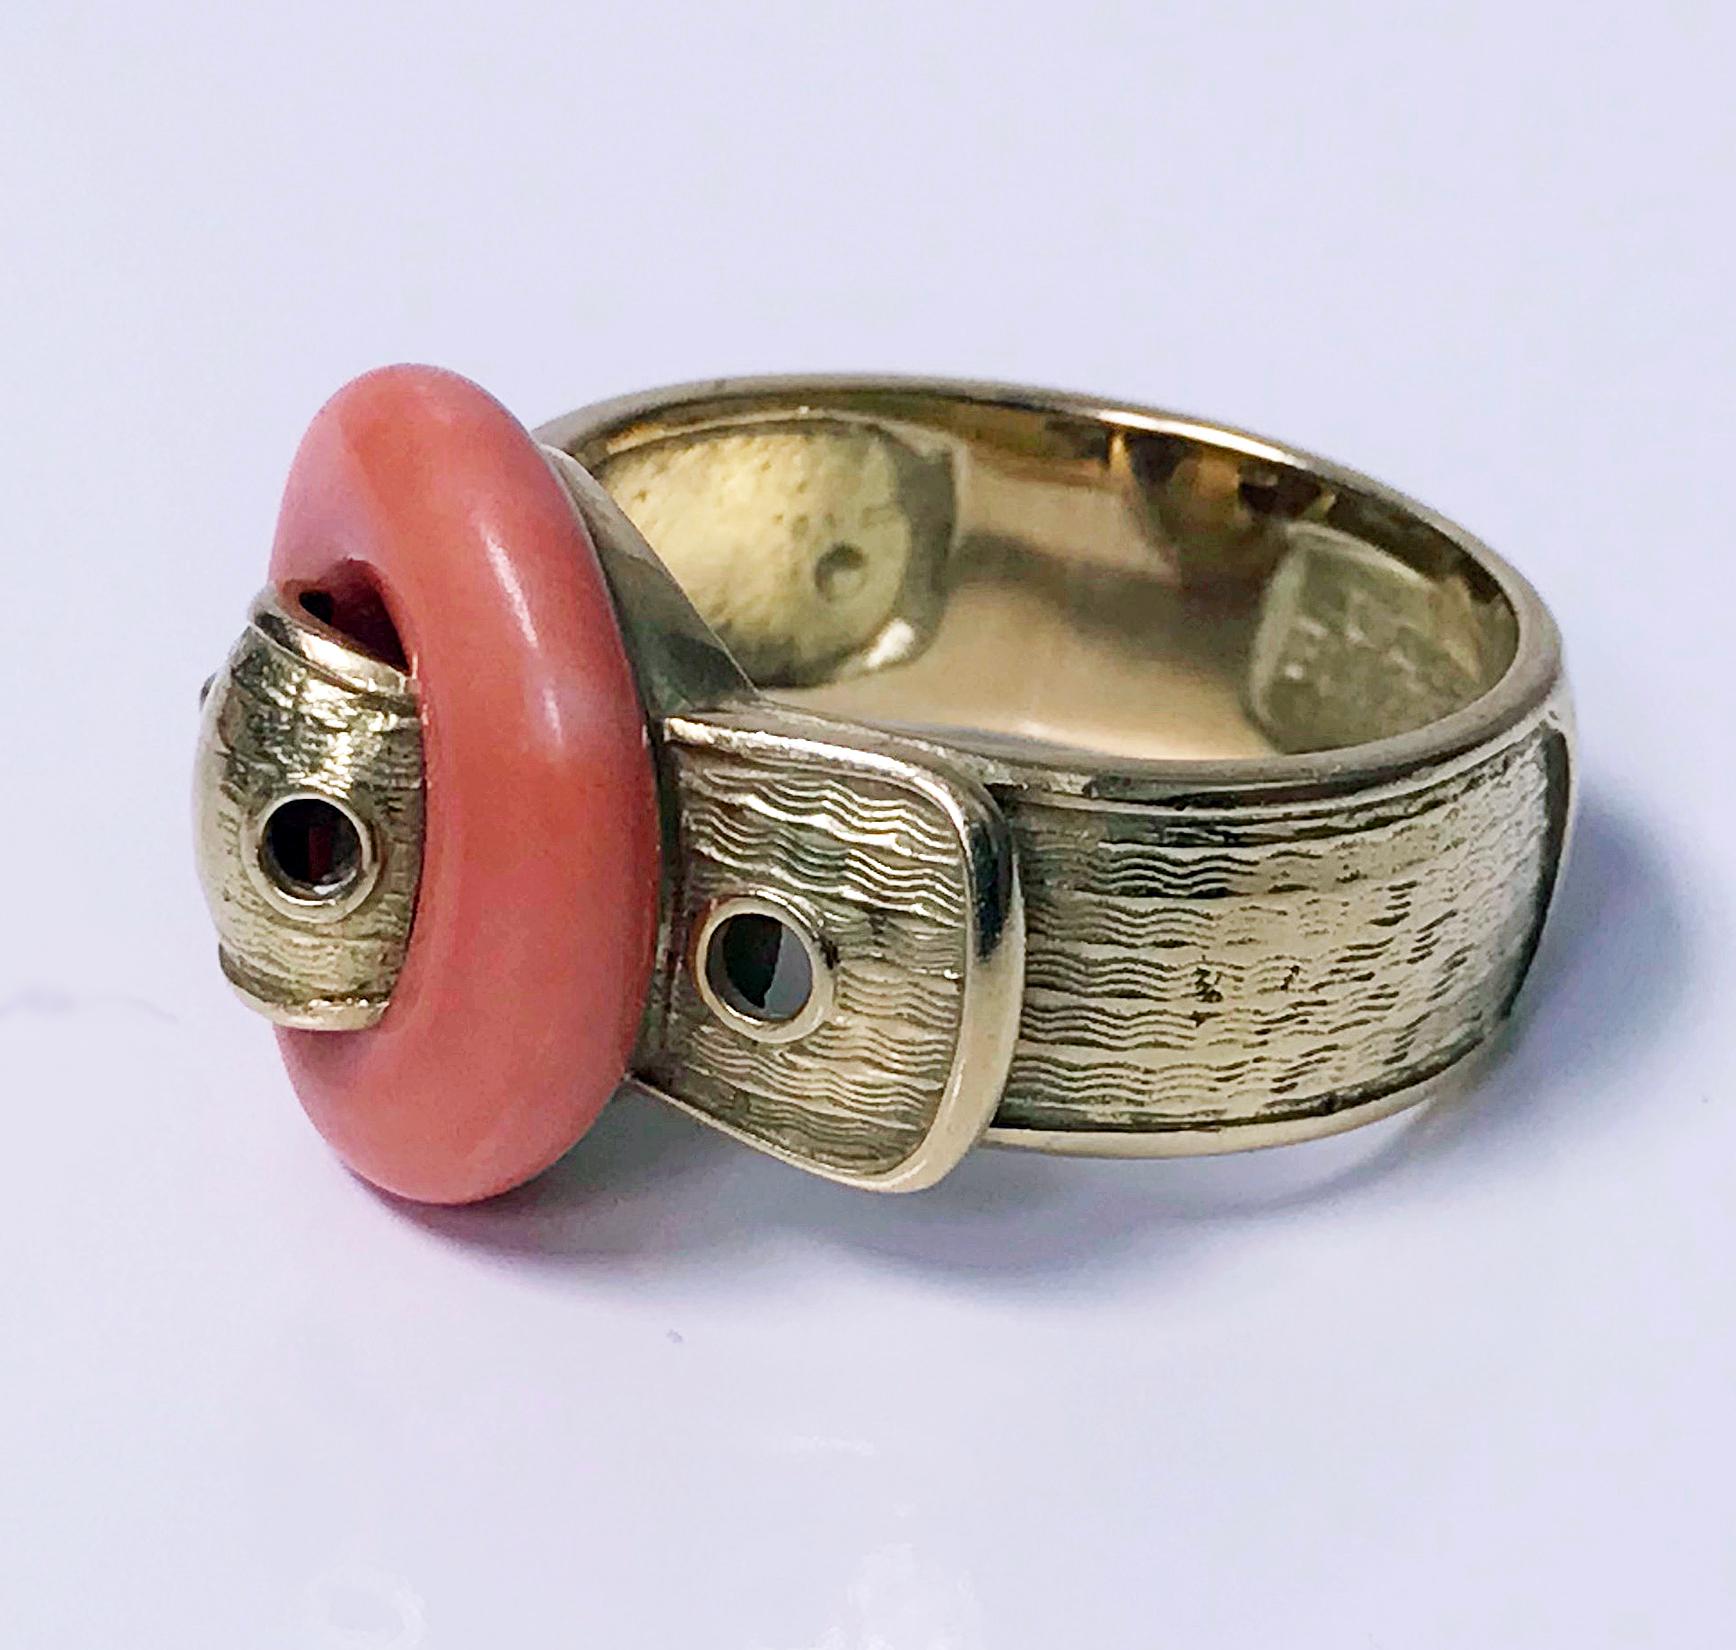 1970’s Piaget 18K Ring. The Ring of 18K yellow gold textured buckle form, the top of `buckle’ with round salmon pink color. Signed Piaget 750 and English import mark for 1974. Total Item Weight: 12 grams. Ring Size: 9. (May be sized). 